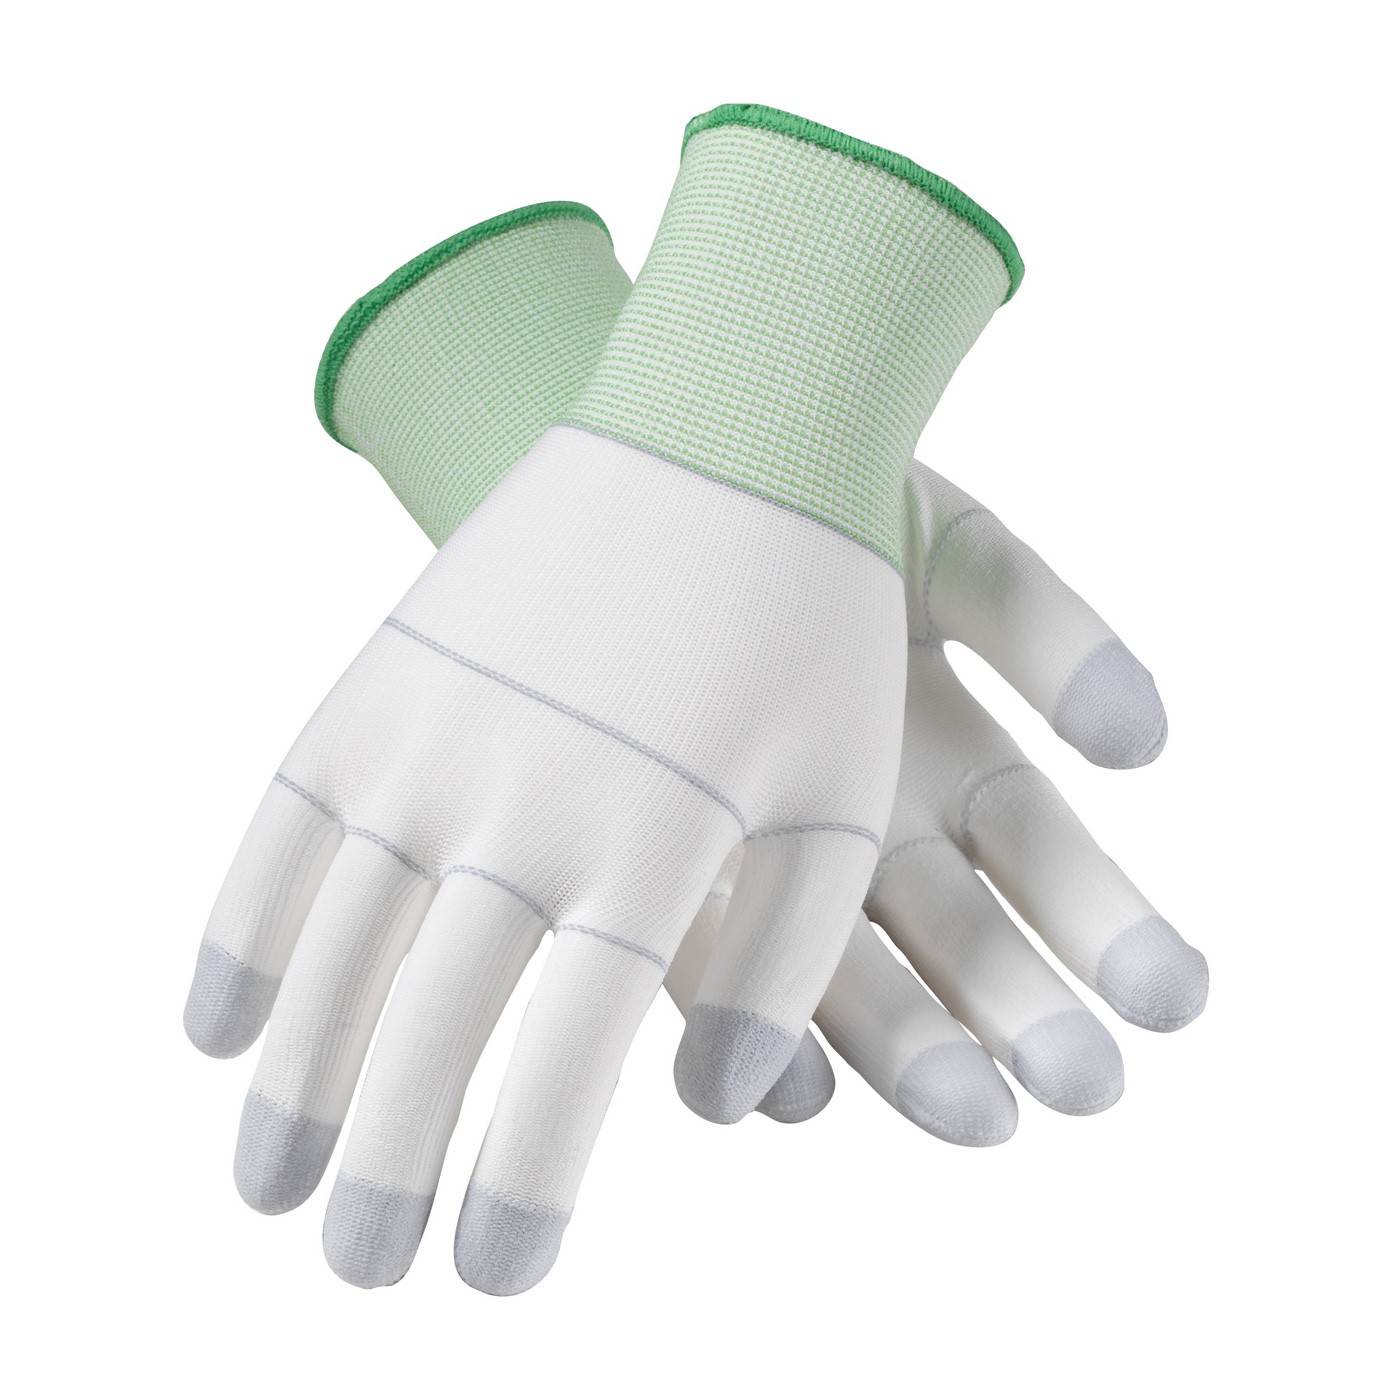 CleanTeam Nylon w/PU Coating on Palm and Finger Tips Size X-Large